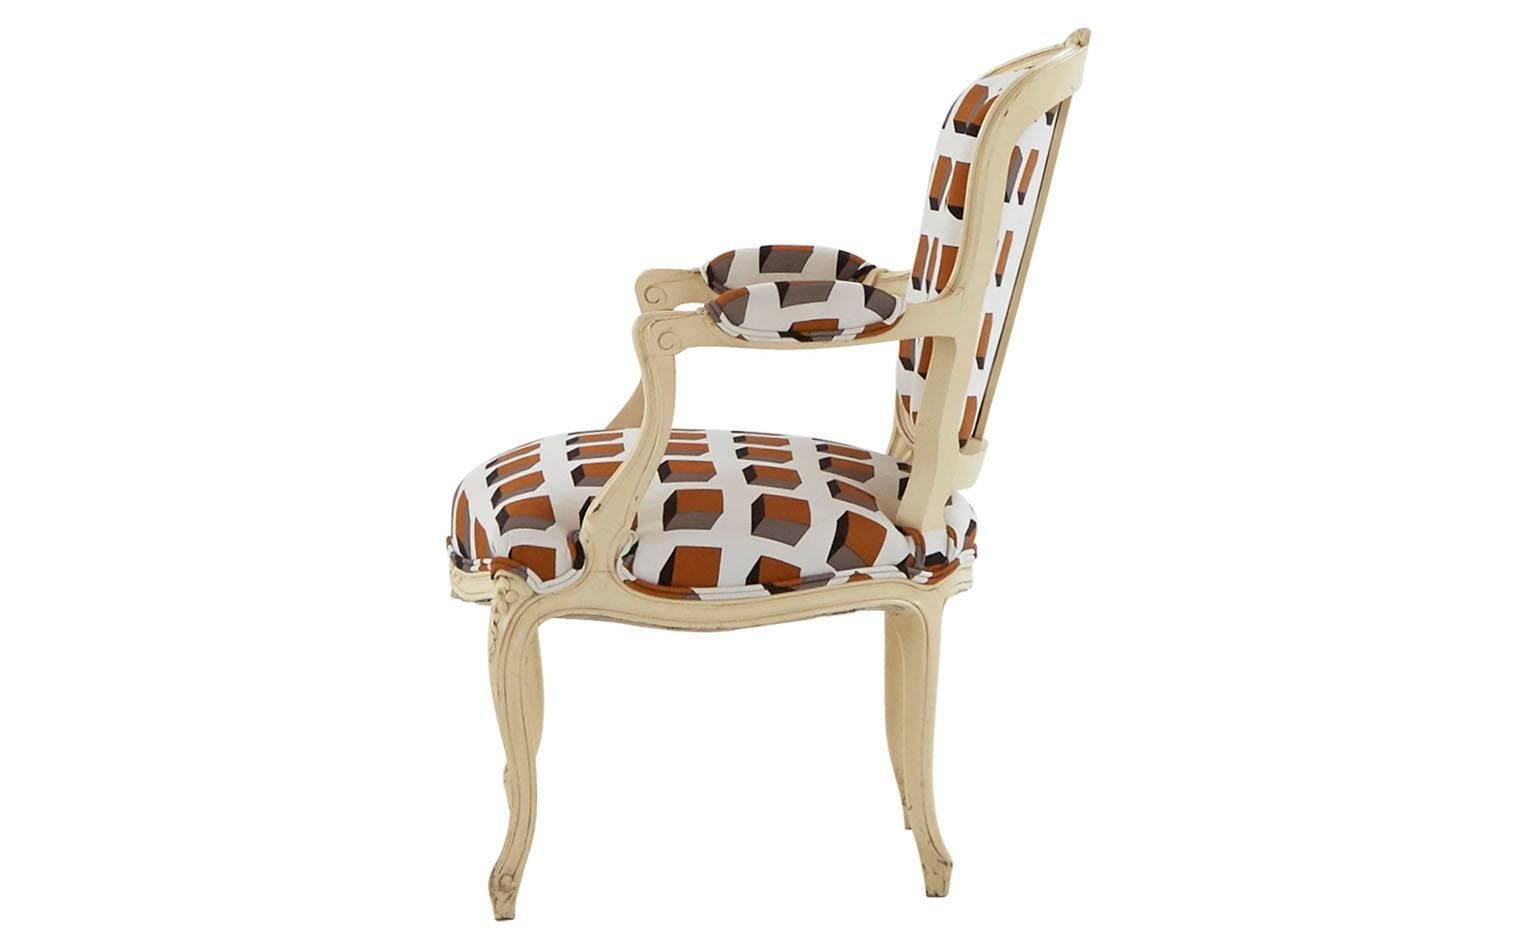 Reupholstered in Gaston y Daniela geometric cotton
Hand-painted ivory wood frame
20th century
France

Dimensions:
Overall: 21.5'D x 25'W x  34'H 
Seat height: 15.5'H
Arm height: 24.5'H